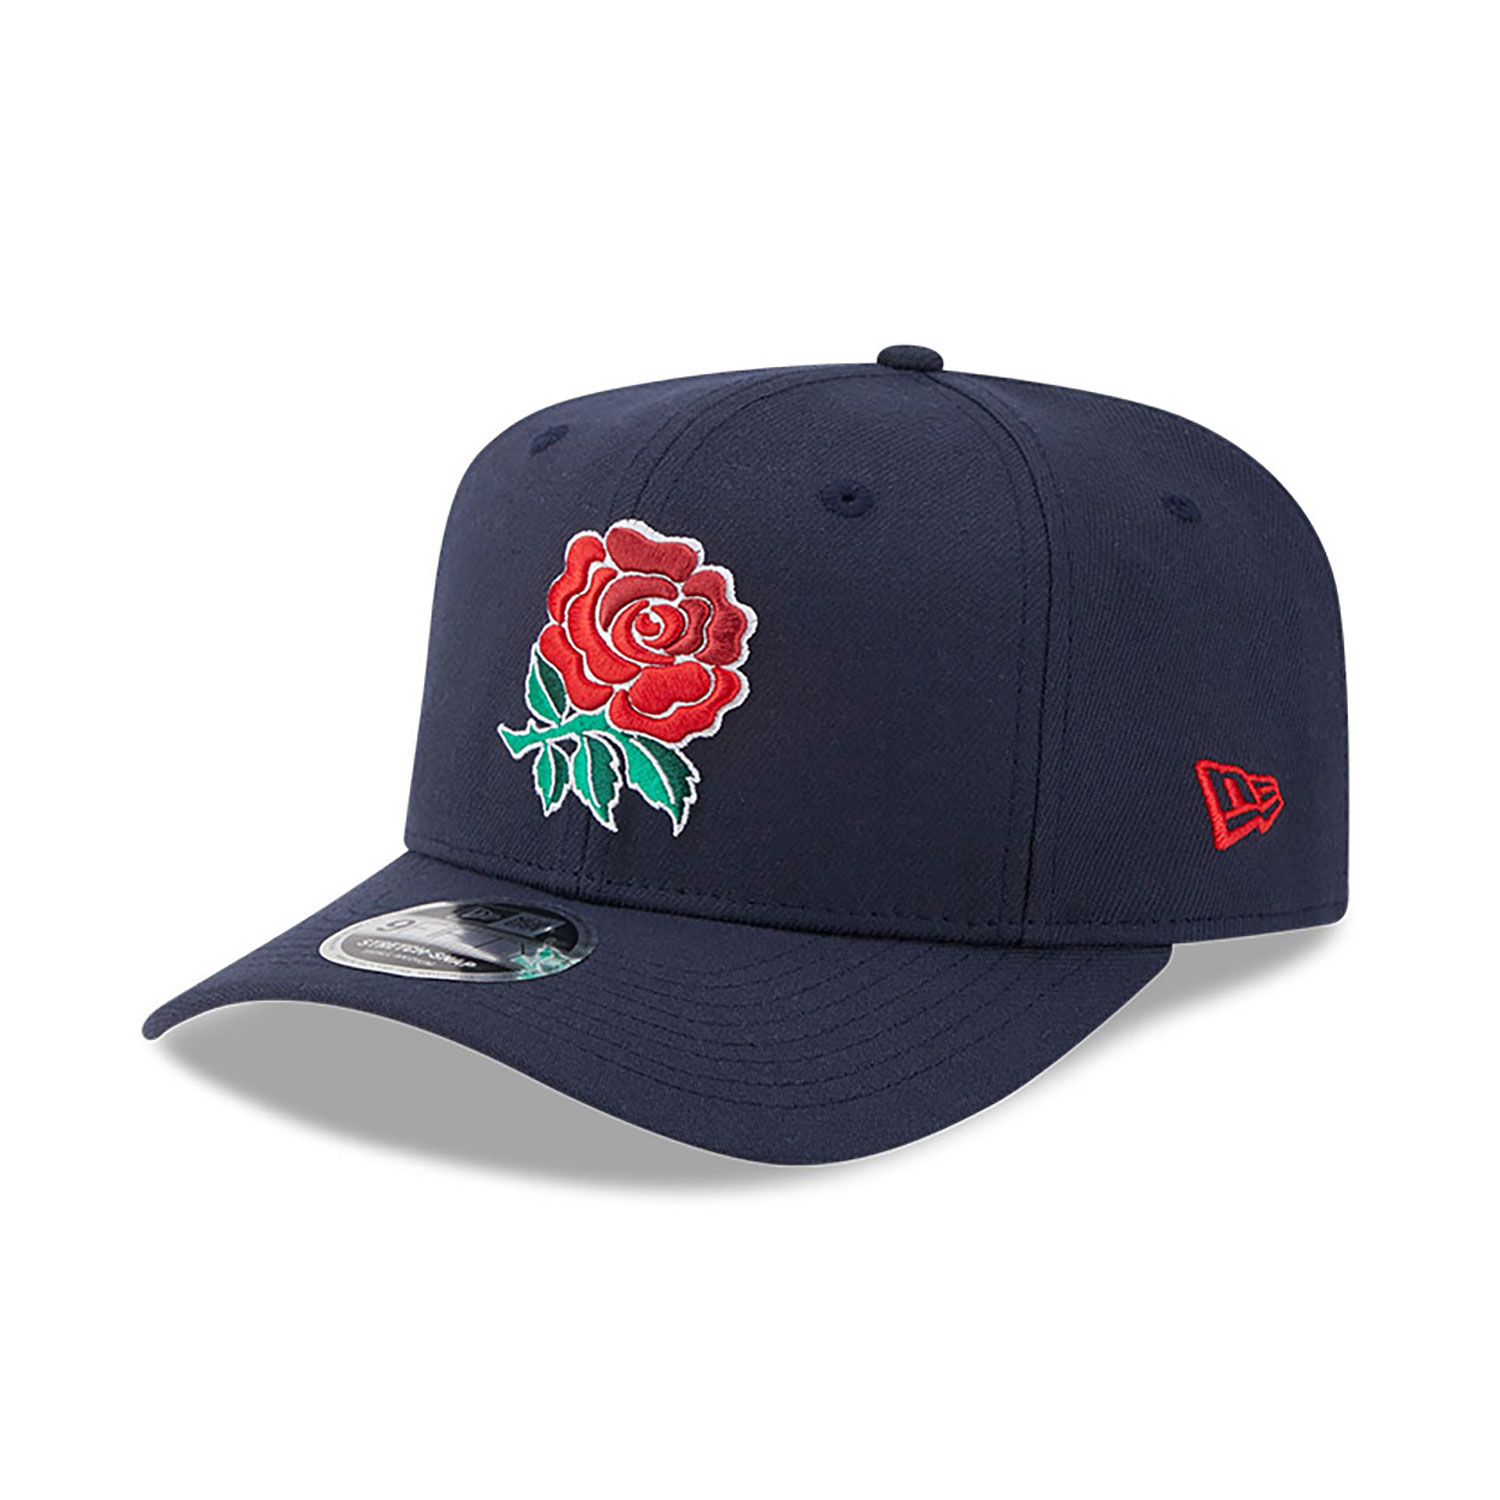 Inghilterra Rugby Union Rose Navy Stretch Snap 9FIFTY Cap